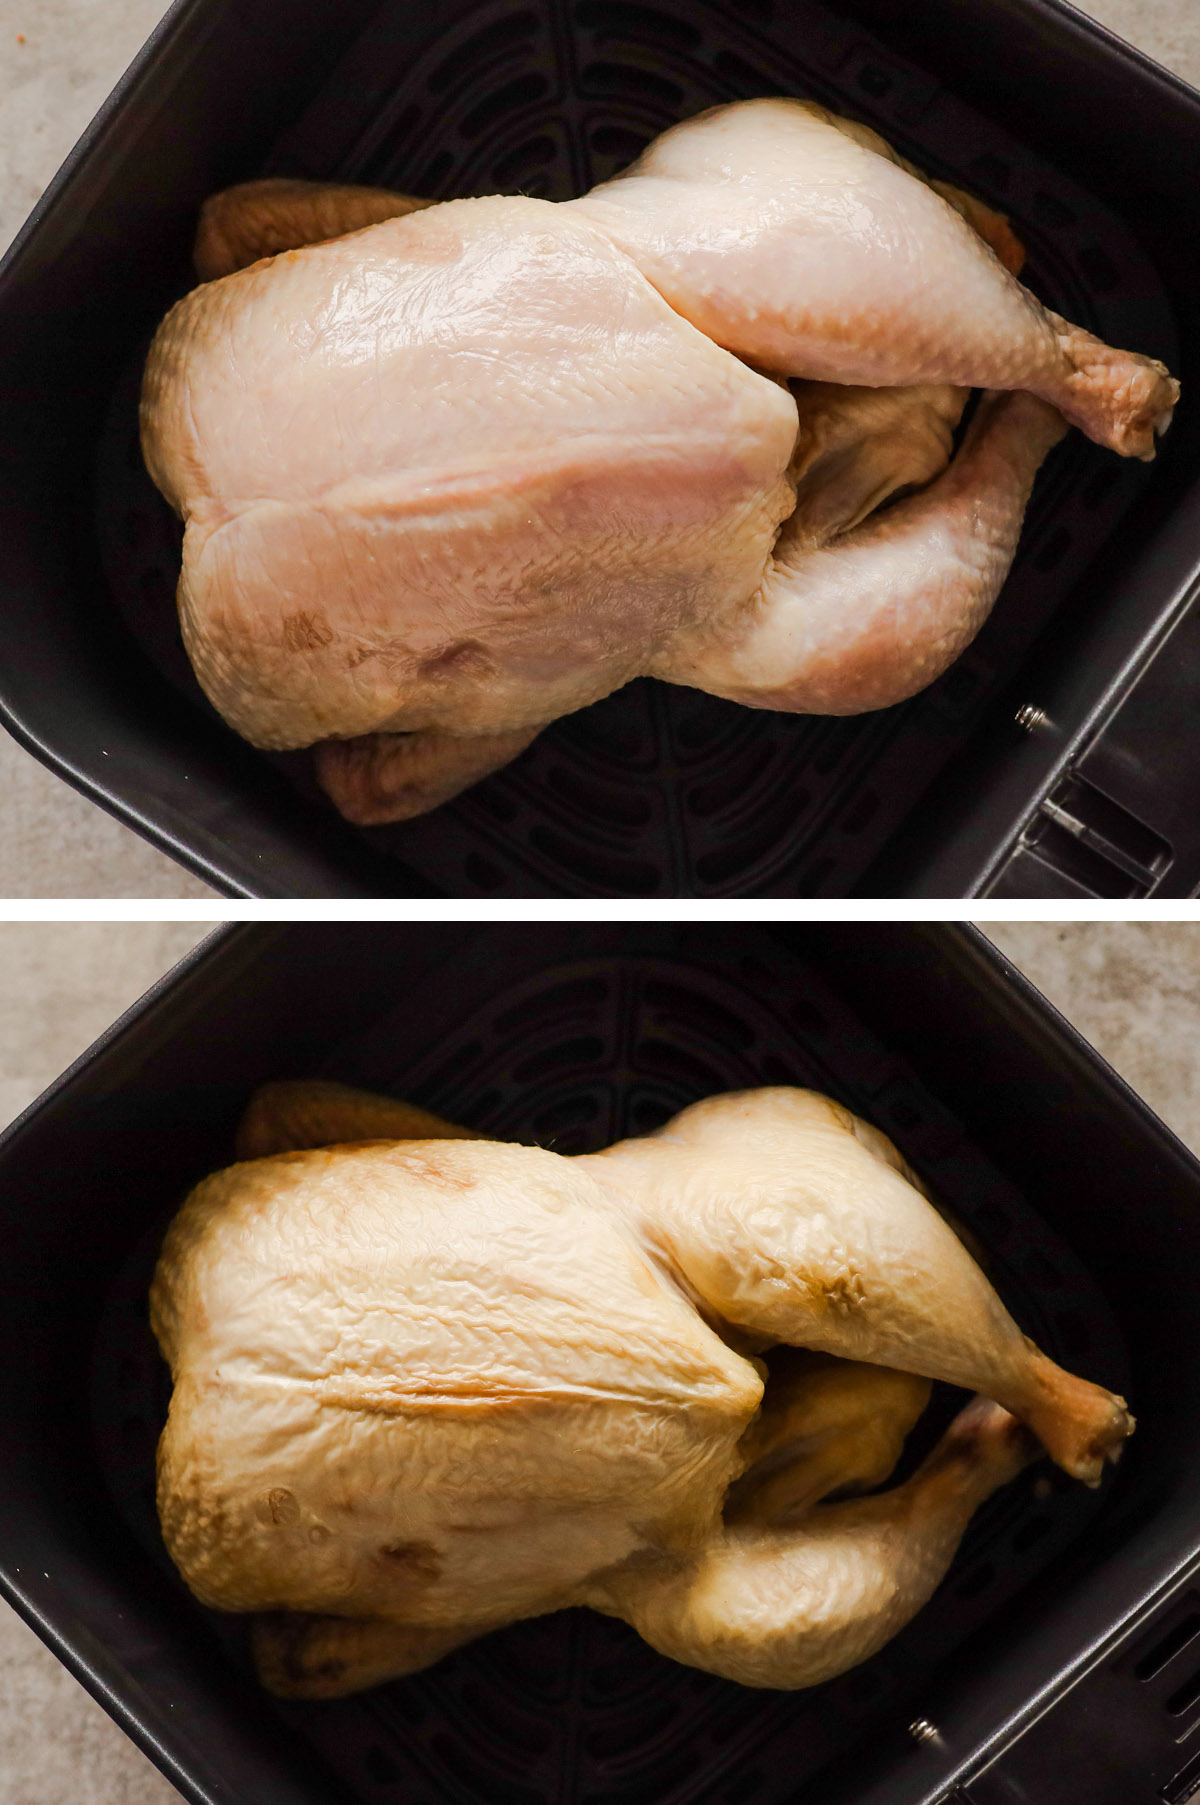 Two pictures of a chicken in an air fryer basket, the first one is raw, the second one is slightly cooked.